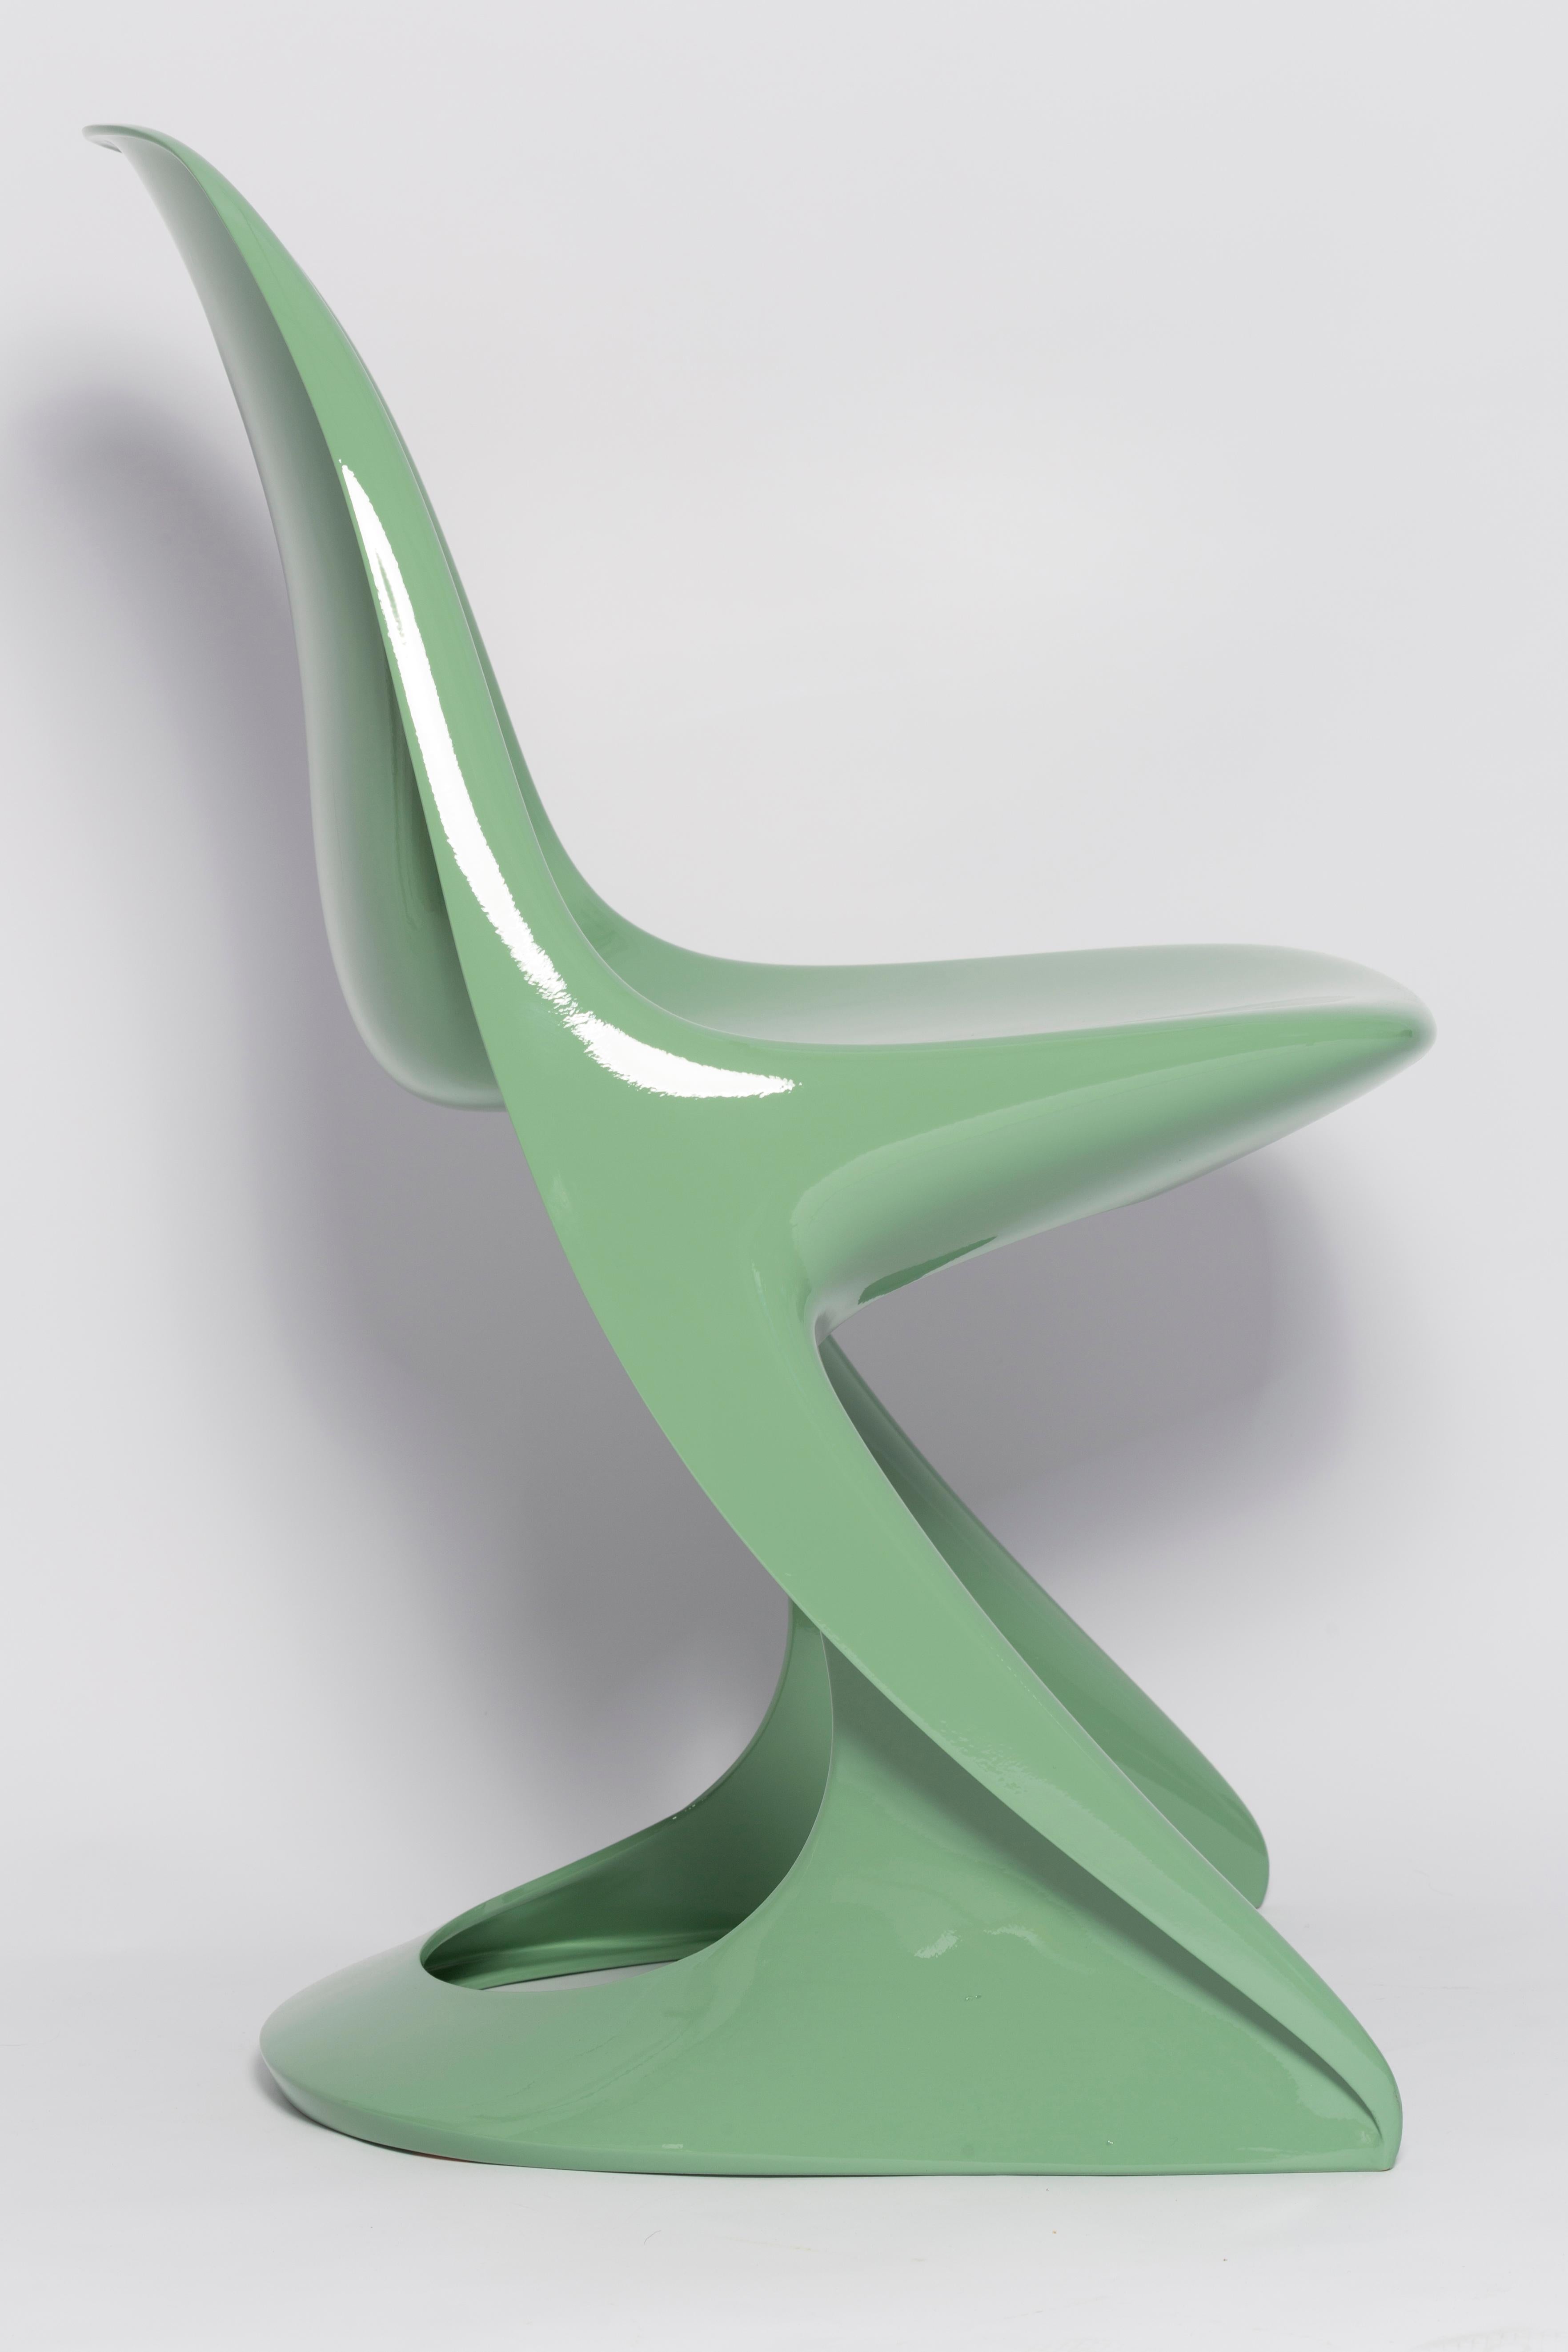 Hand-Painted Mid-Century Casalino Chair in Jade Green, Alexander Begge, Casala, Germany 1970s For Sale